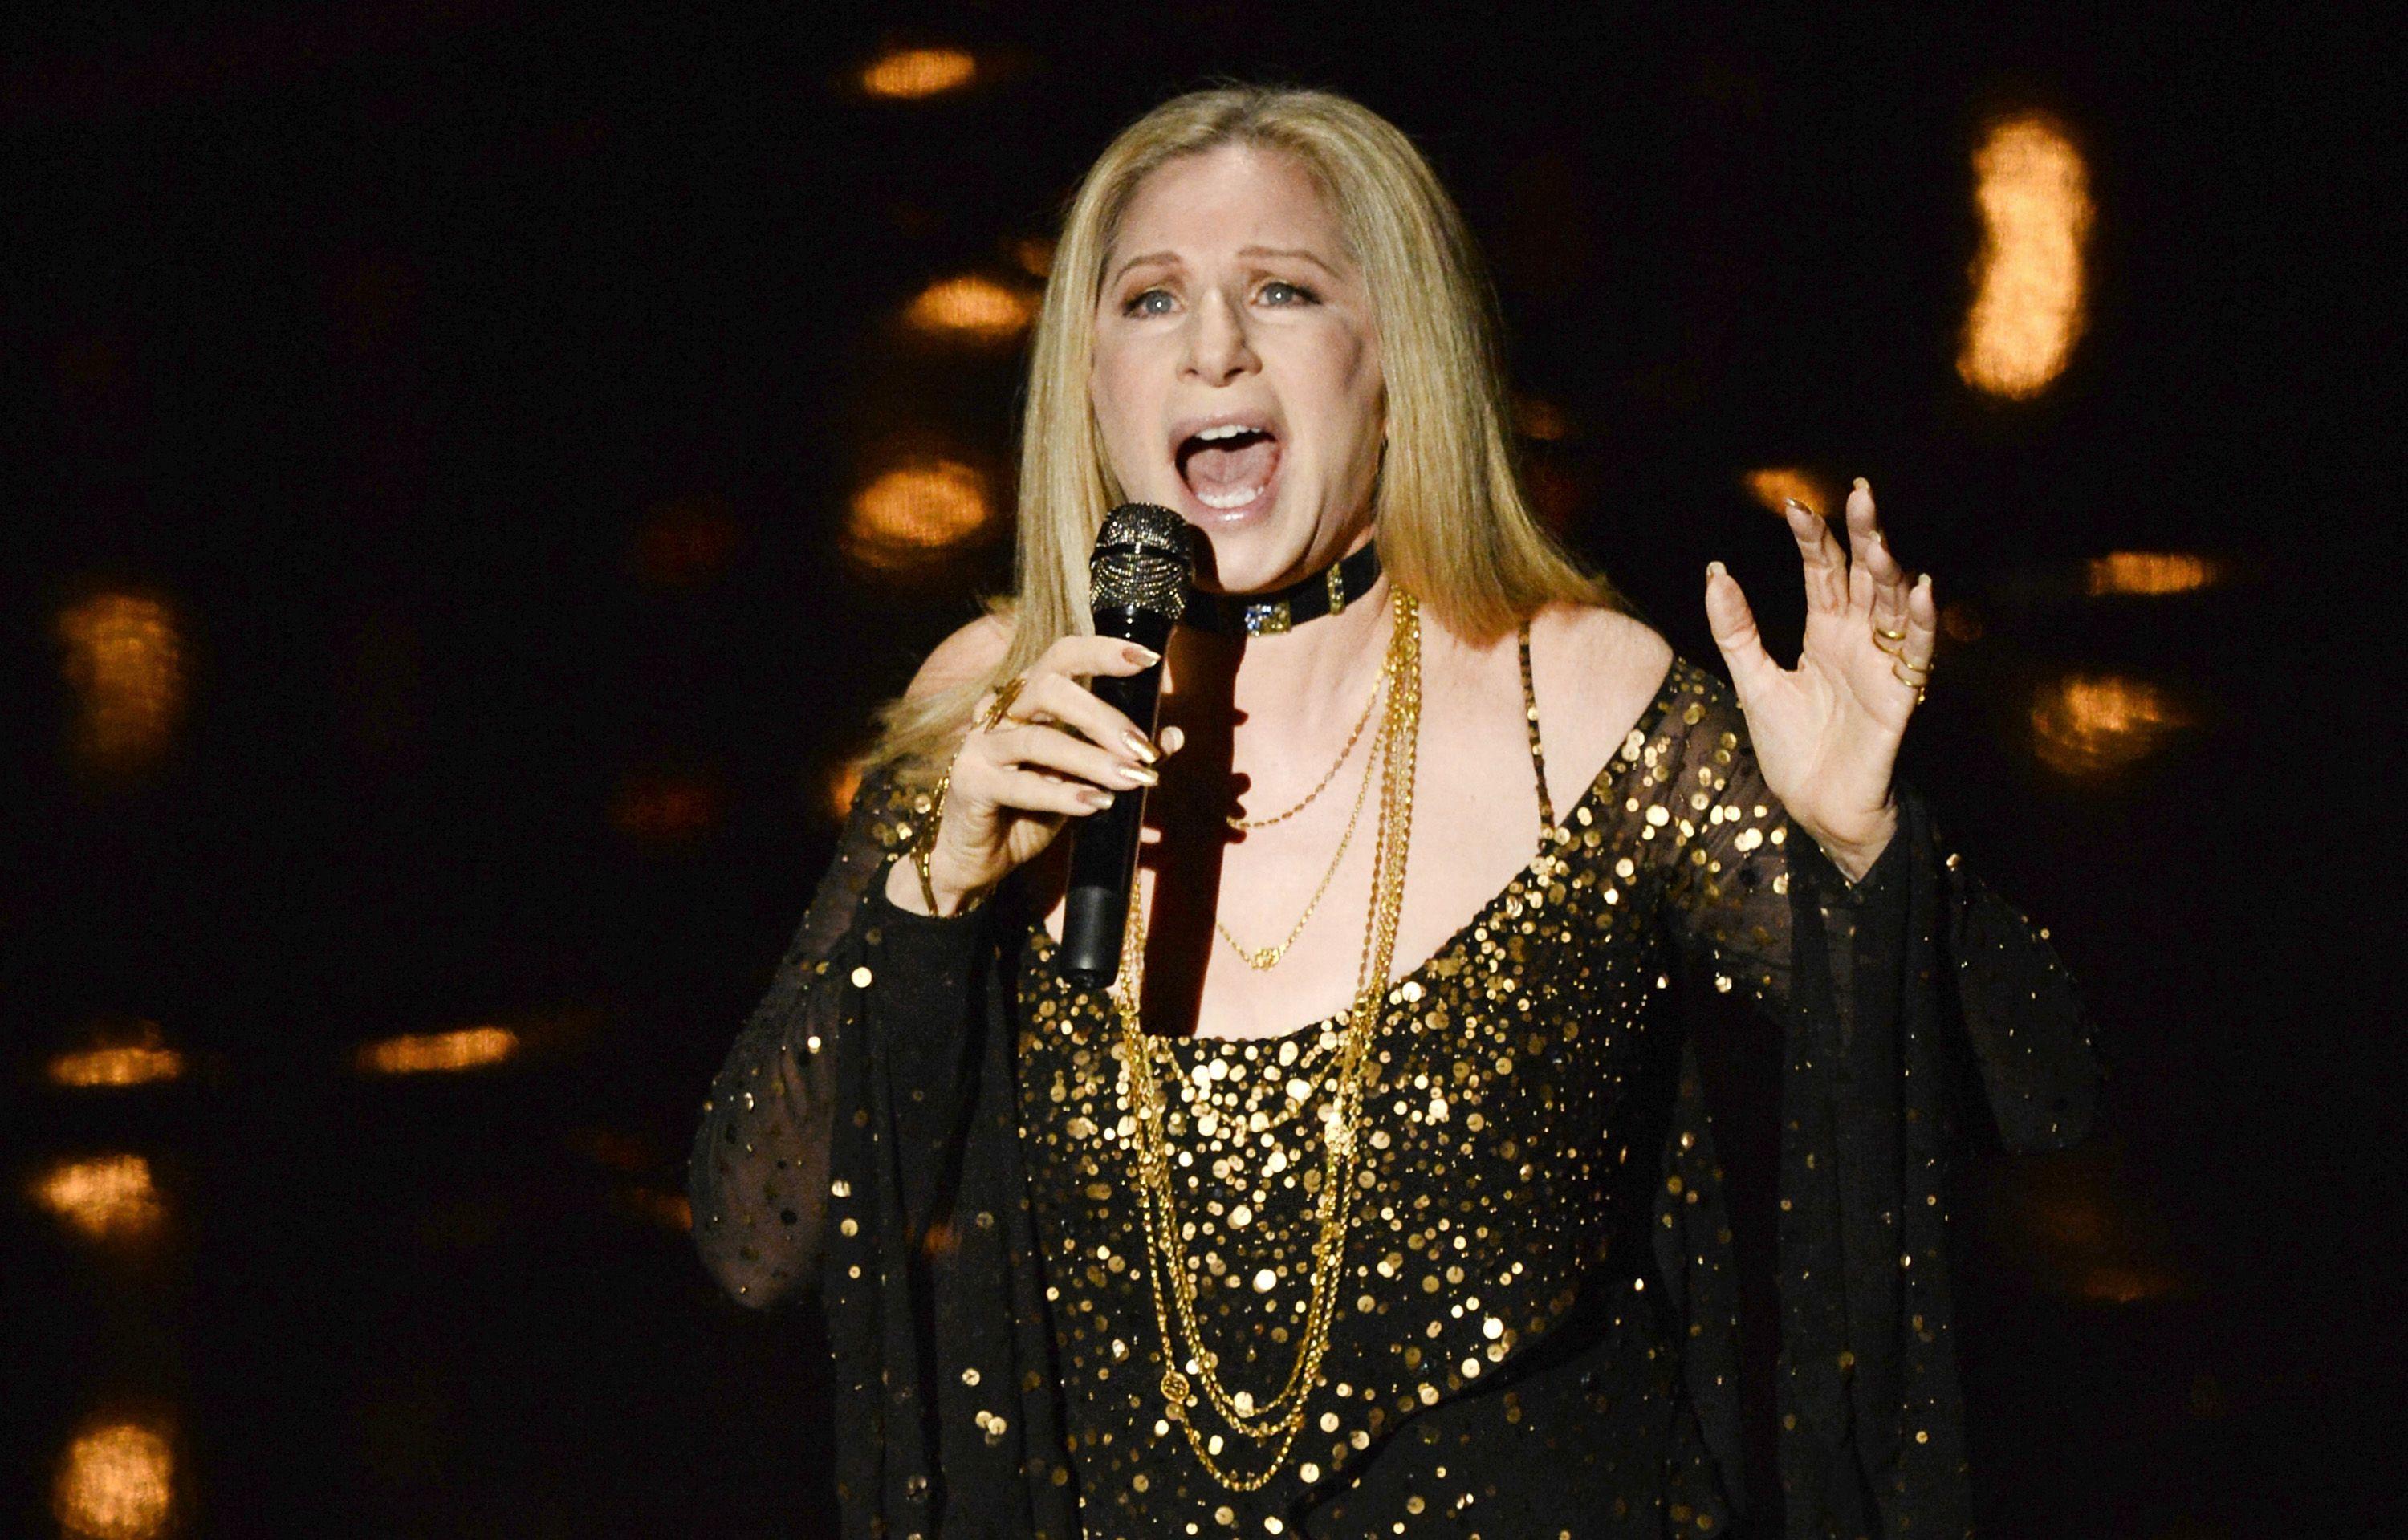 Barbra Streisand To Receive Cinematographers' Board Of Governors